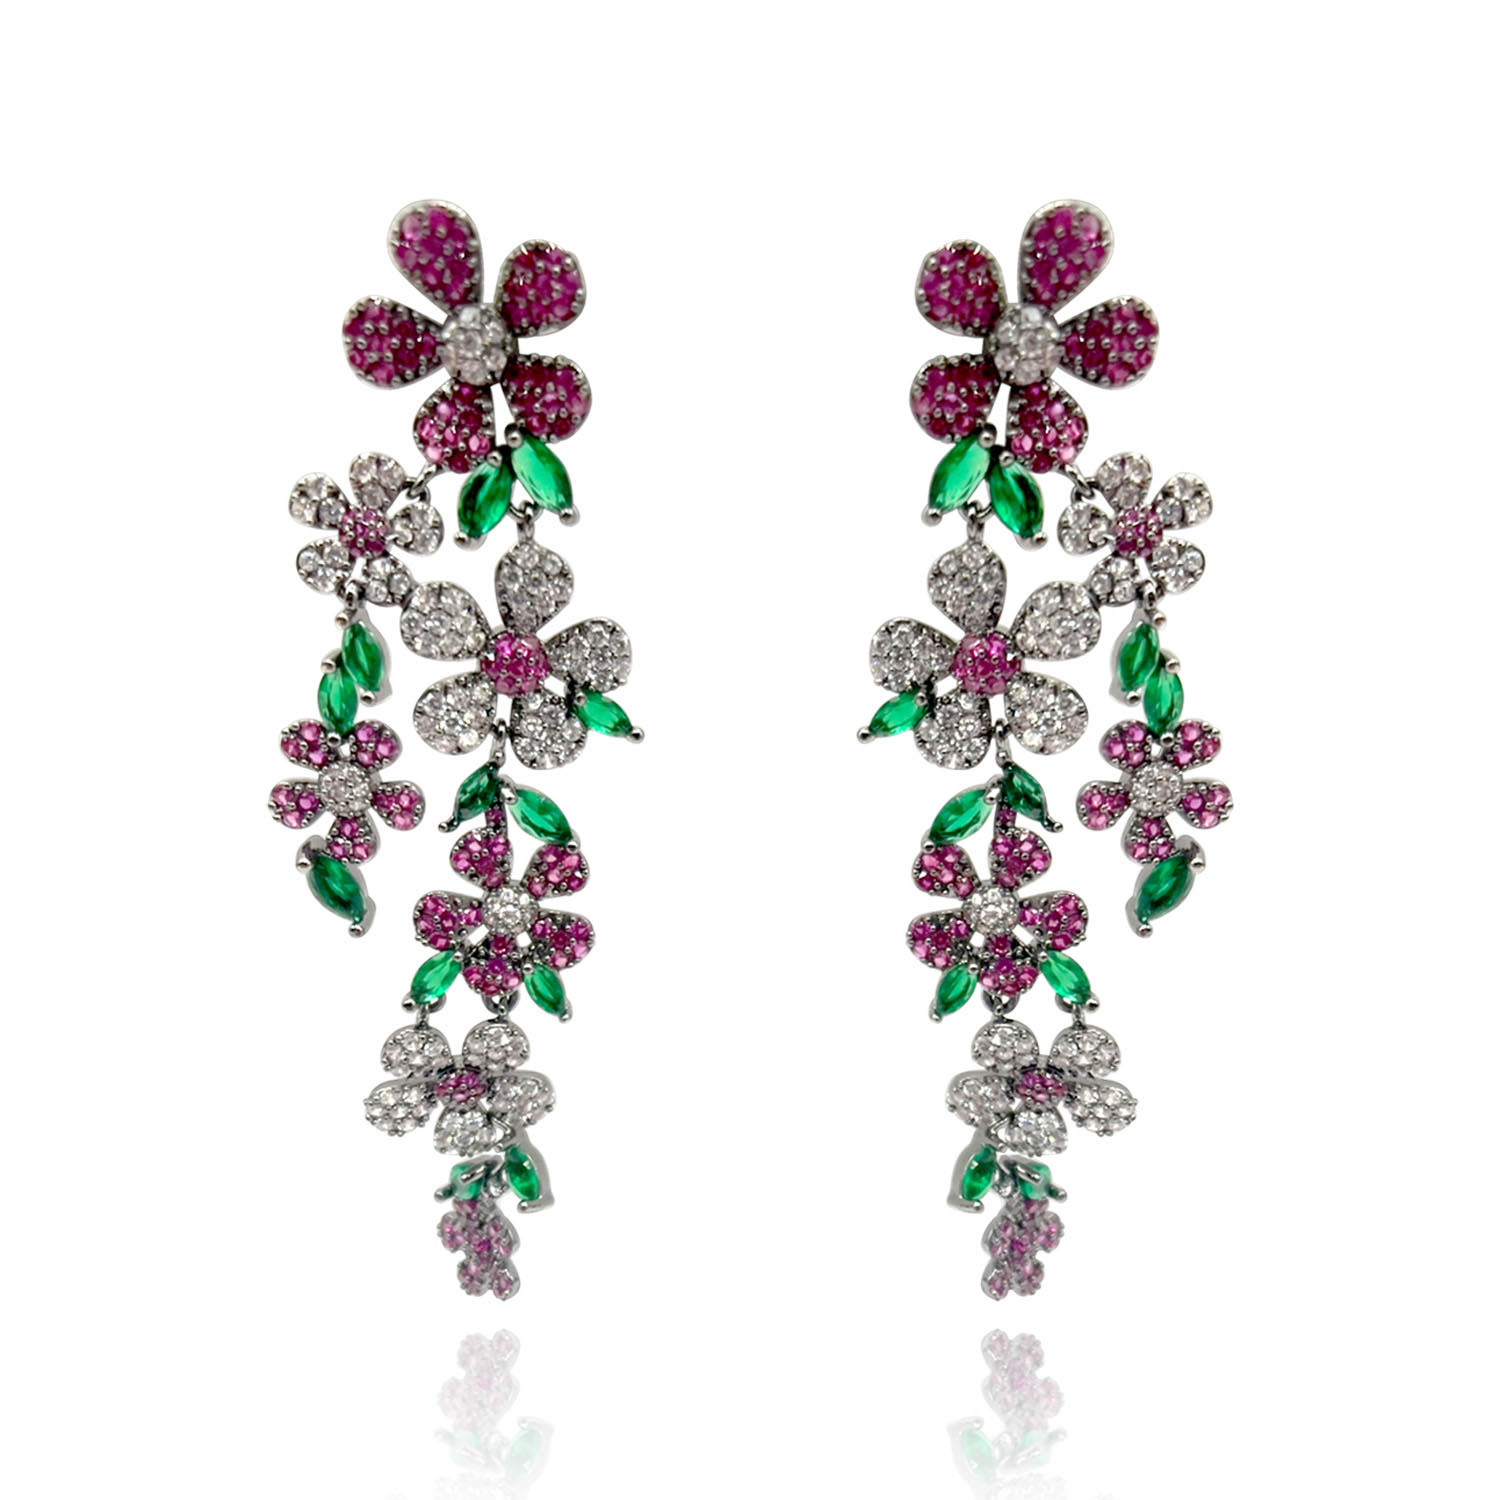 Women’s Floral Pave Pierced Earrings Multi-Color Set In Blackened Rhodium Michael Nash Jewelry